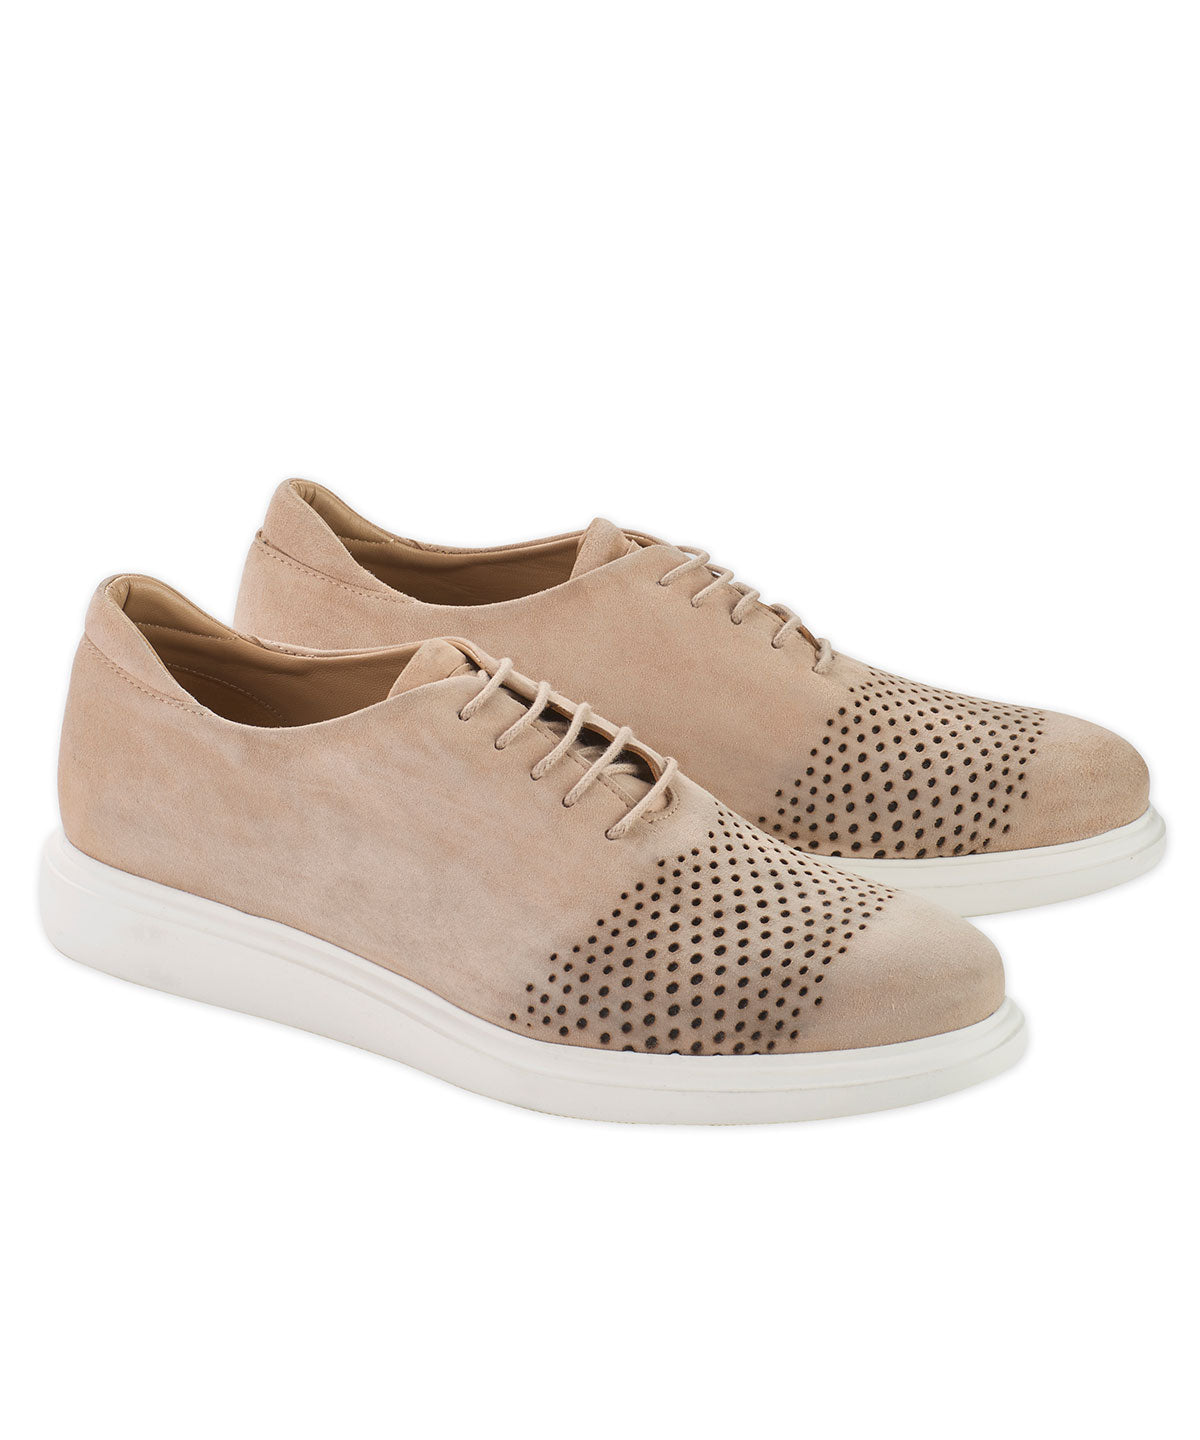 Bobby Jones Suede Lace-up Sneakers